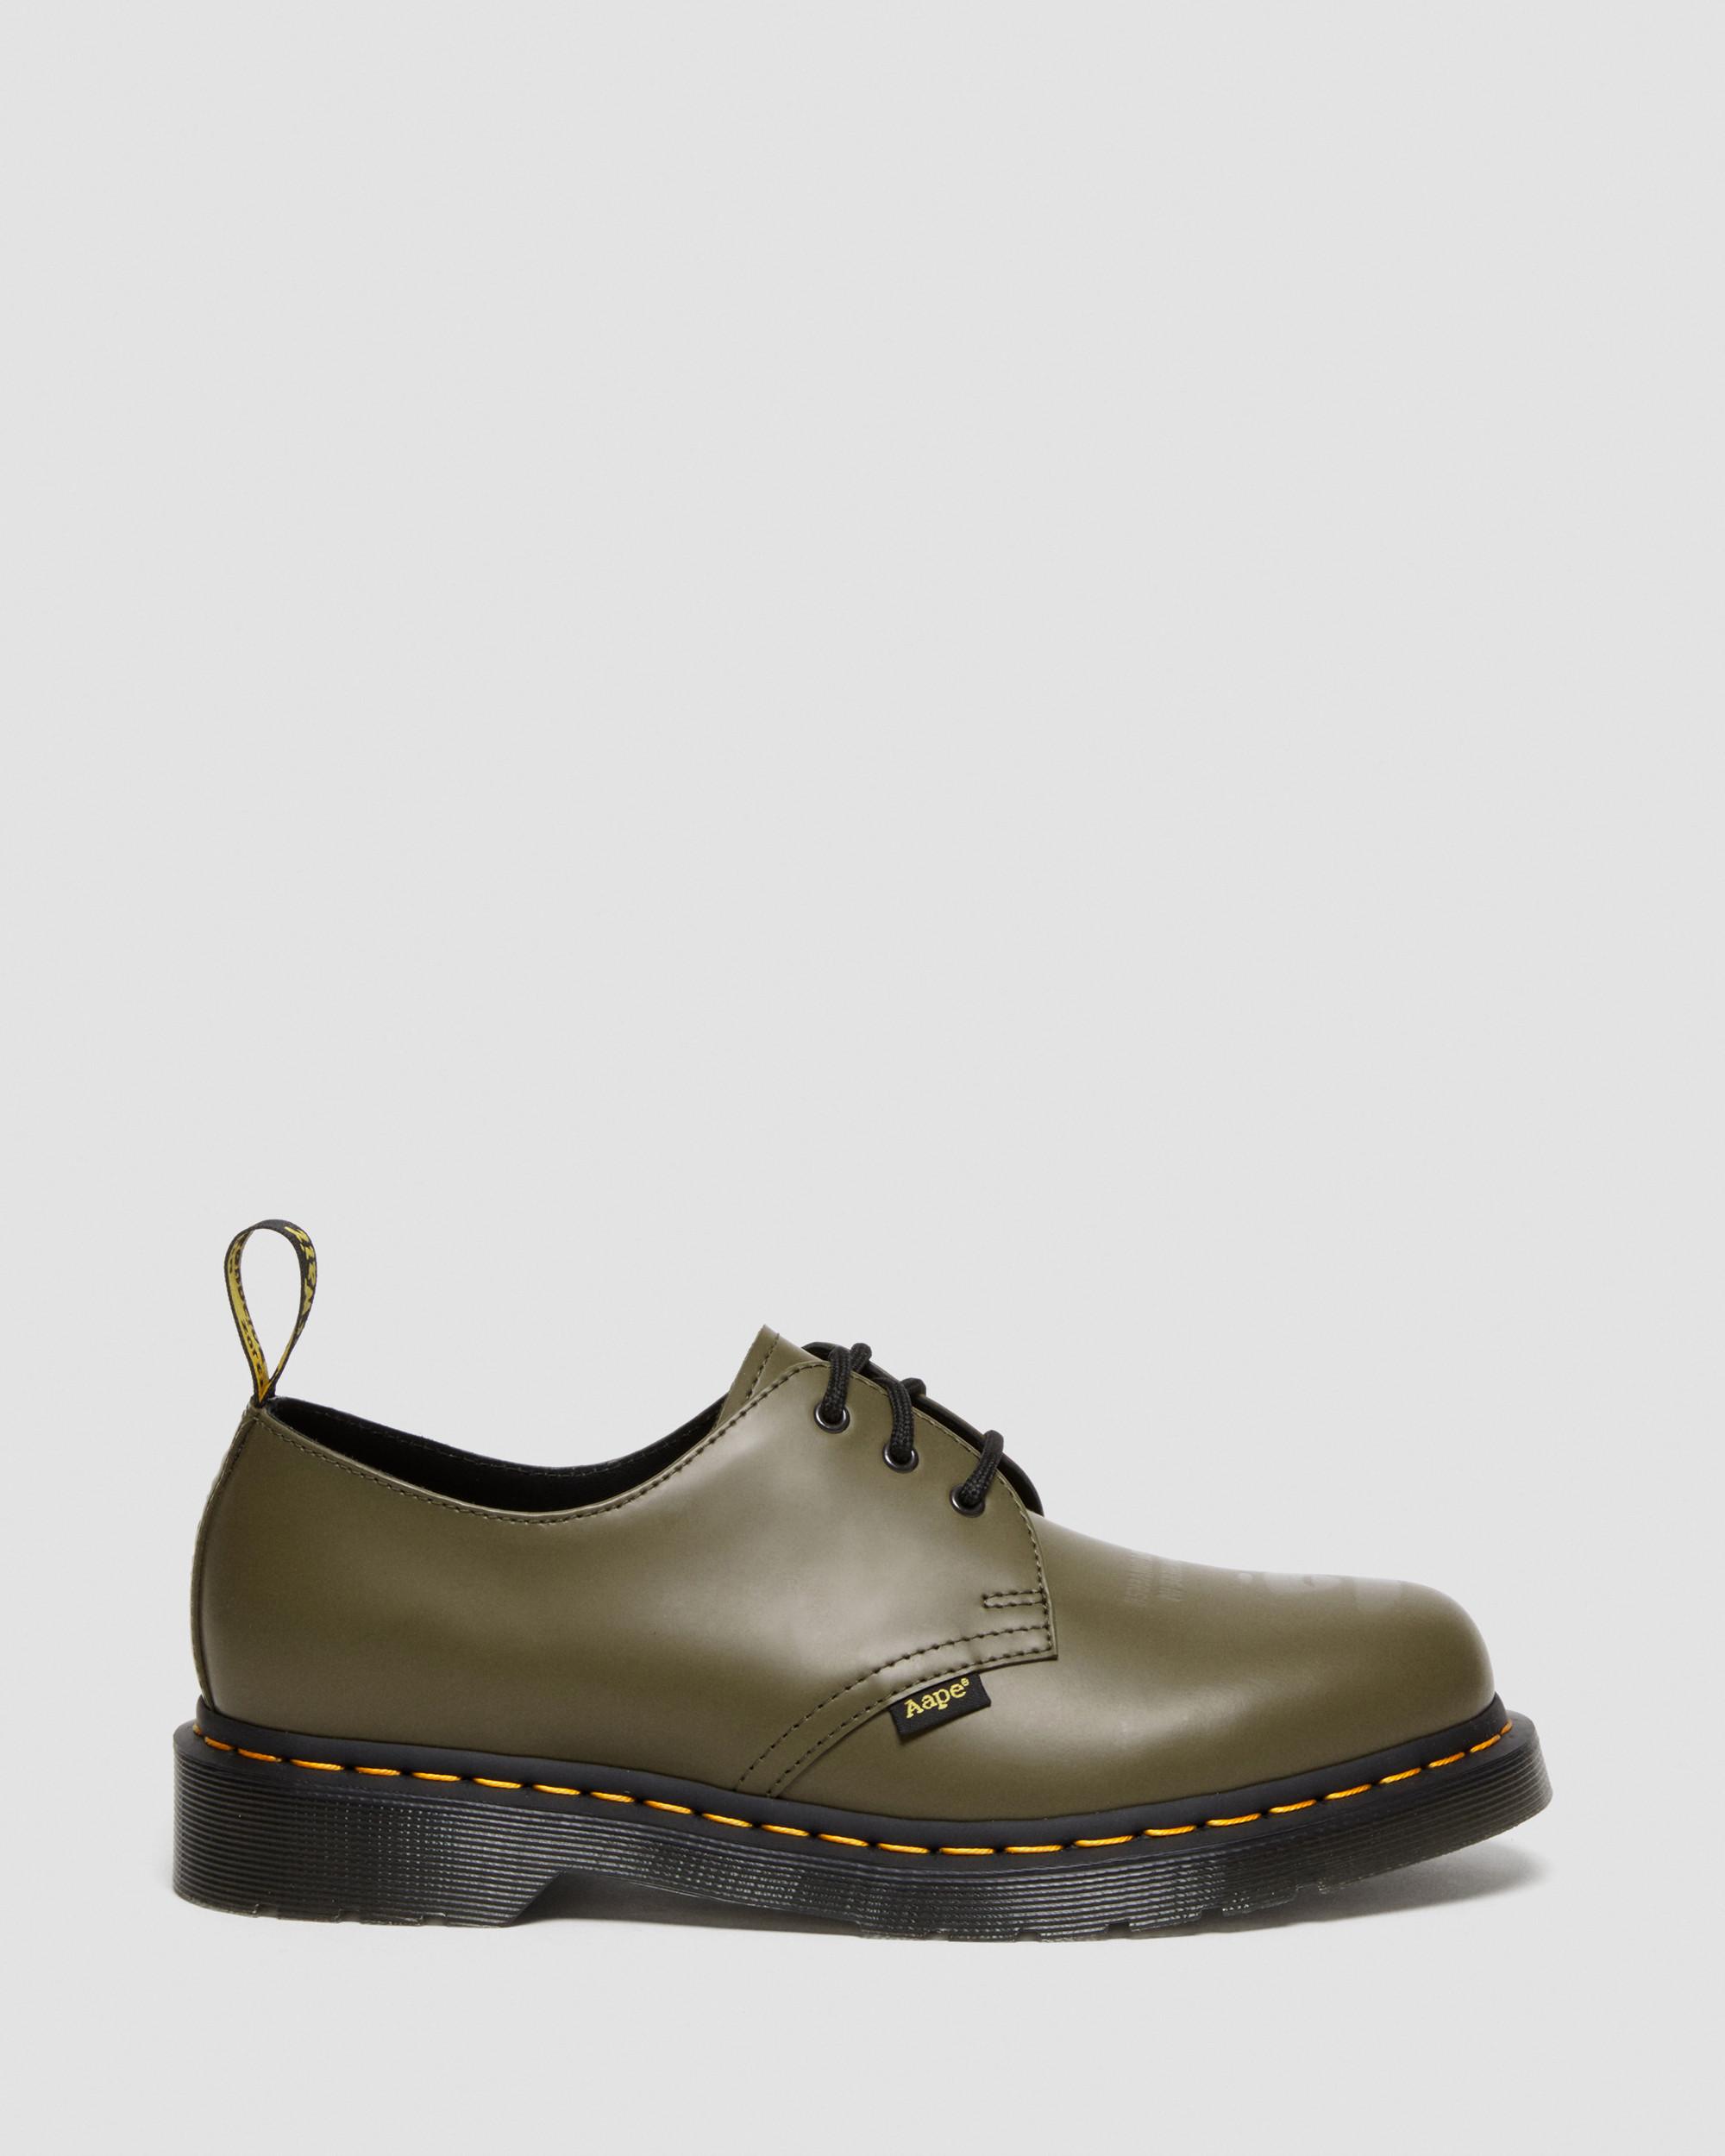 1461 AAPE Smooth Leather Shoes in Olive Green